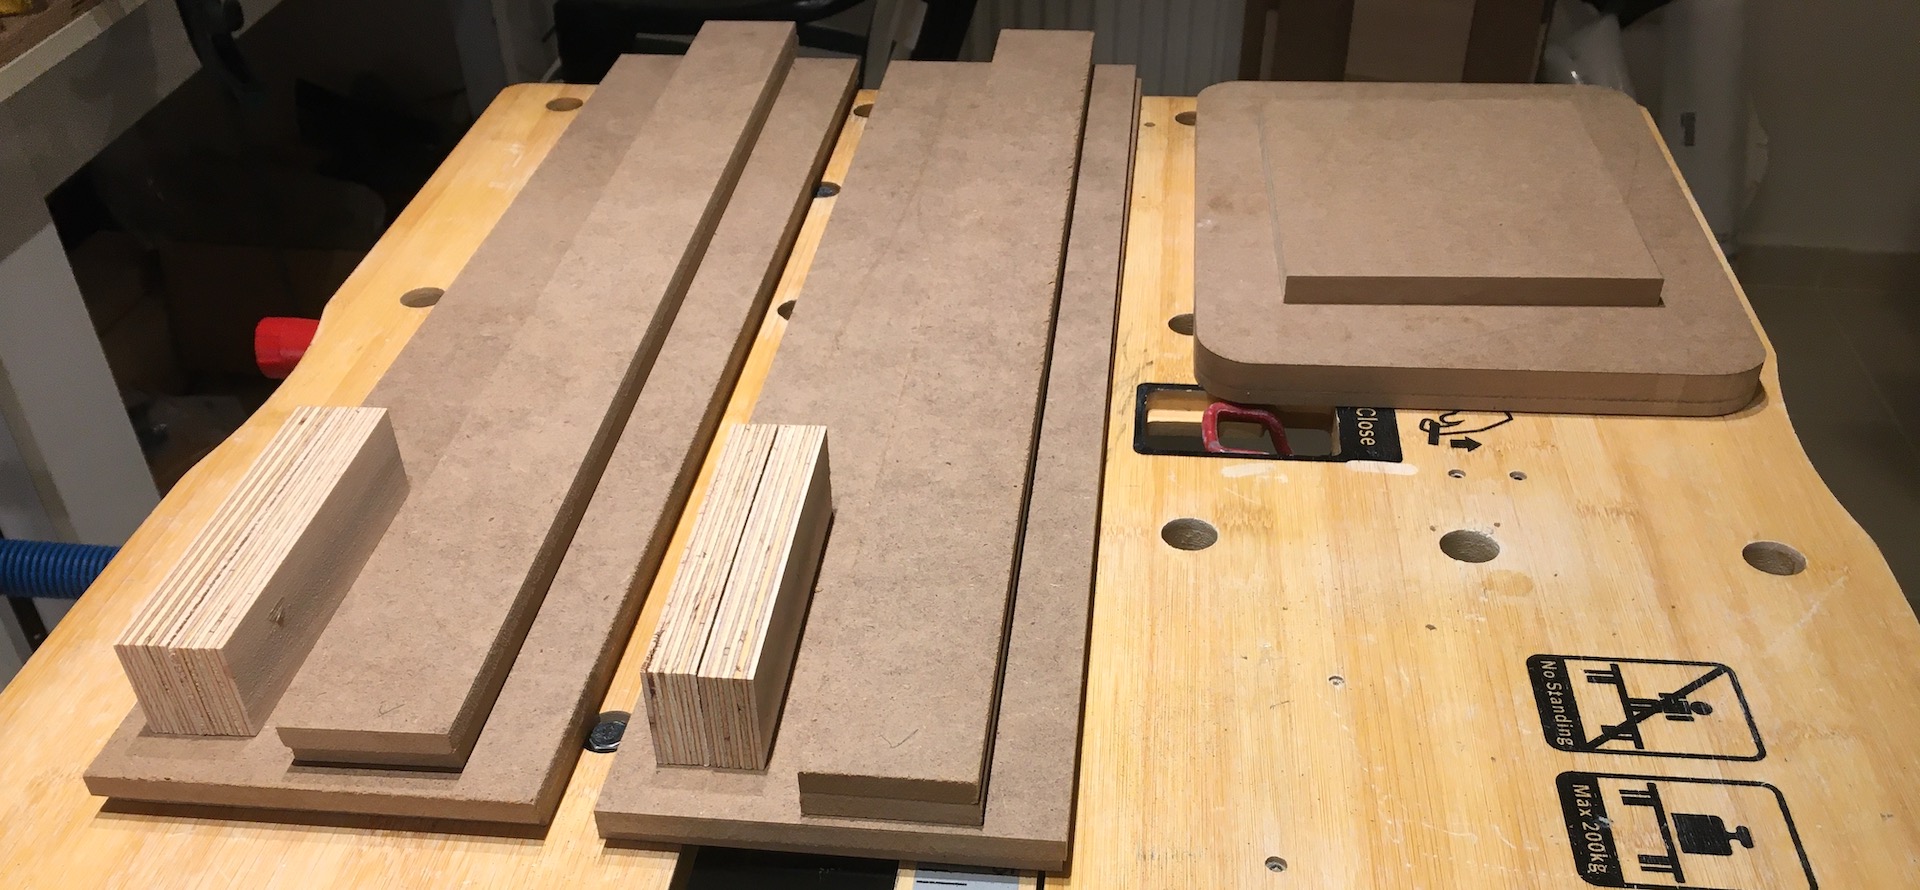 Pieces cut for one speaker stand.